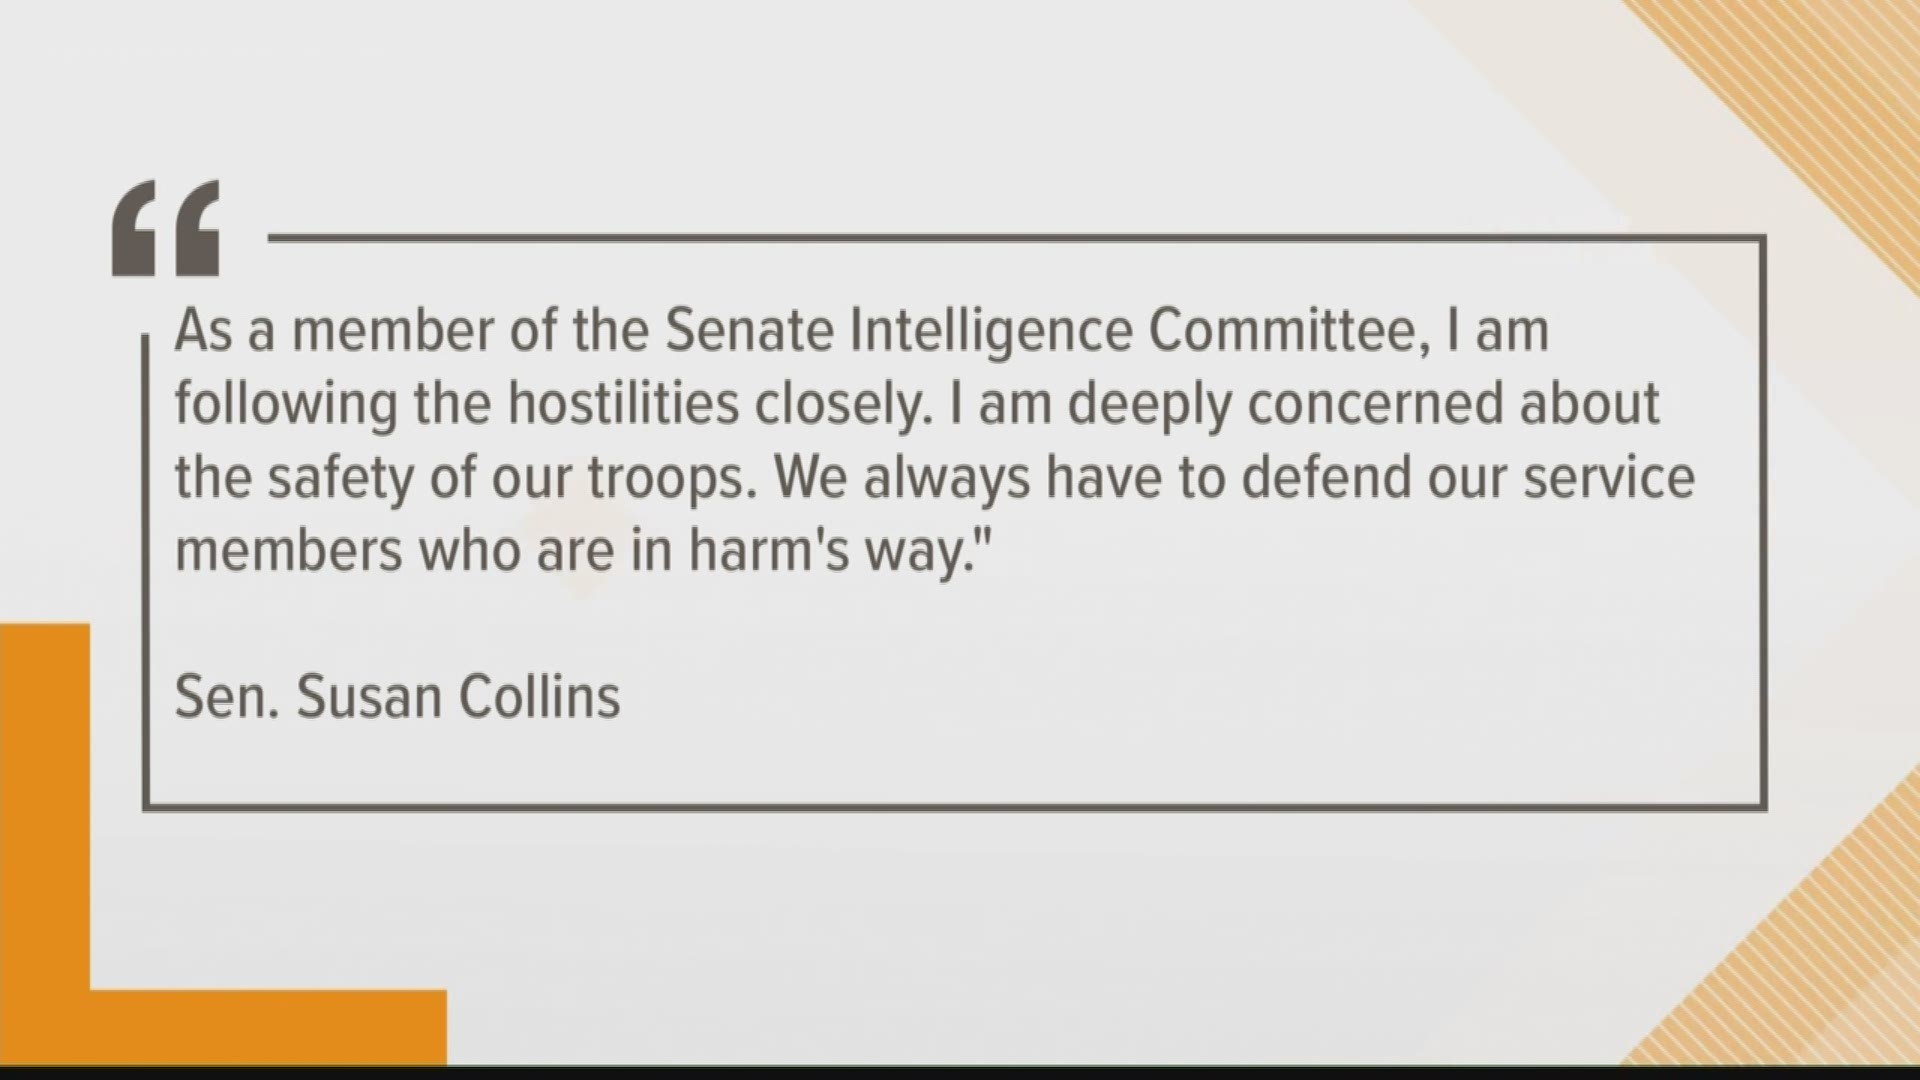 Senator Susan Collins says she expects to be briefed by the White House and that she is concerned abou the safety of our troops.